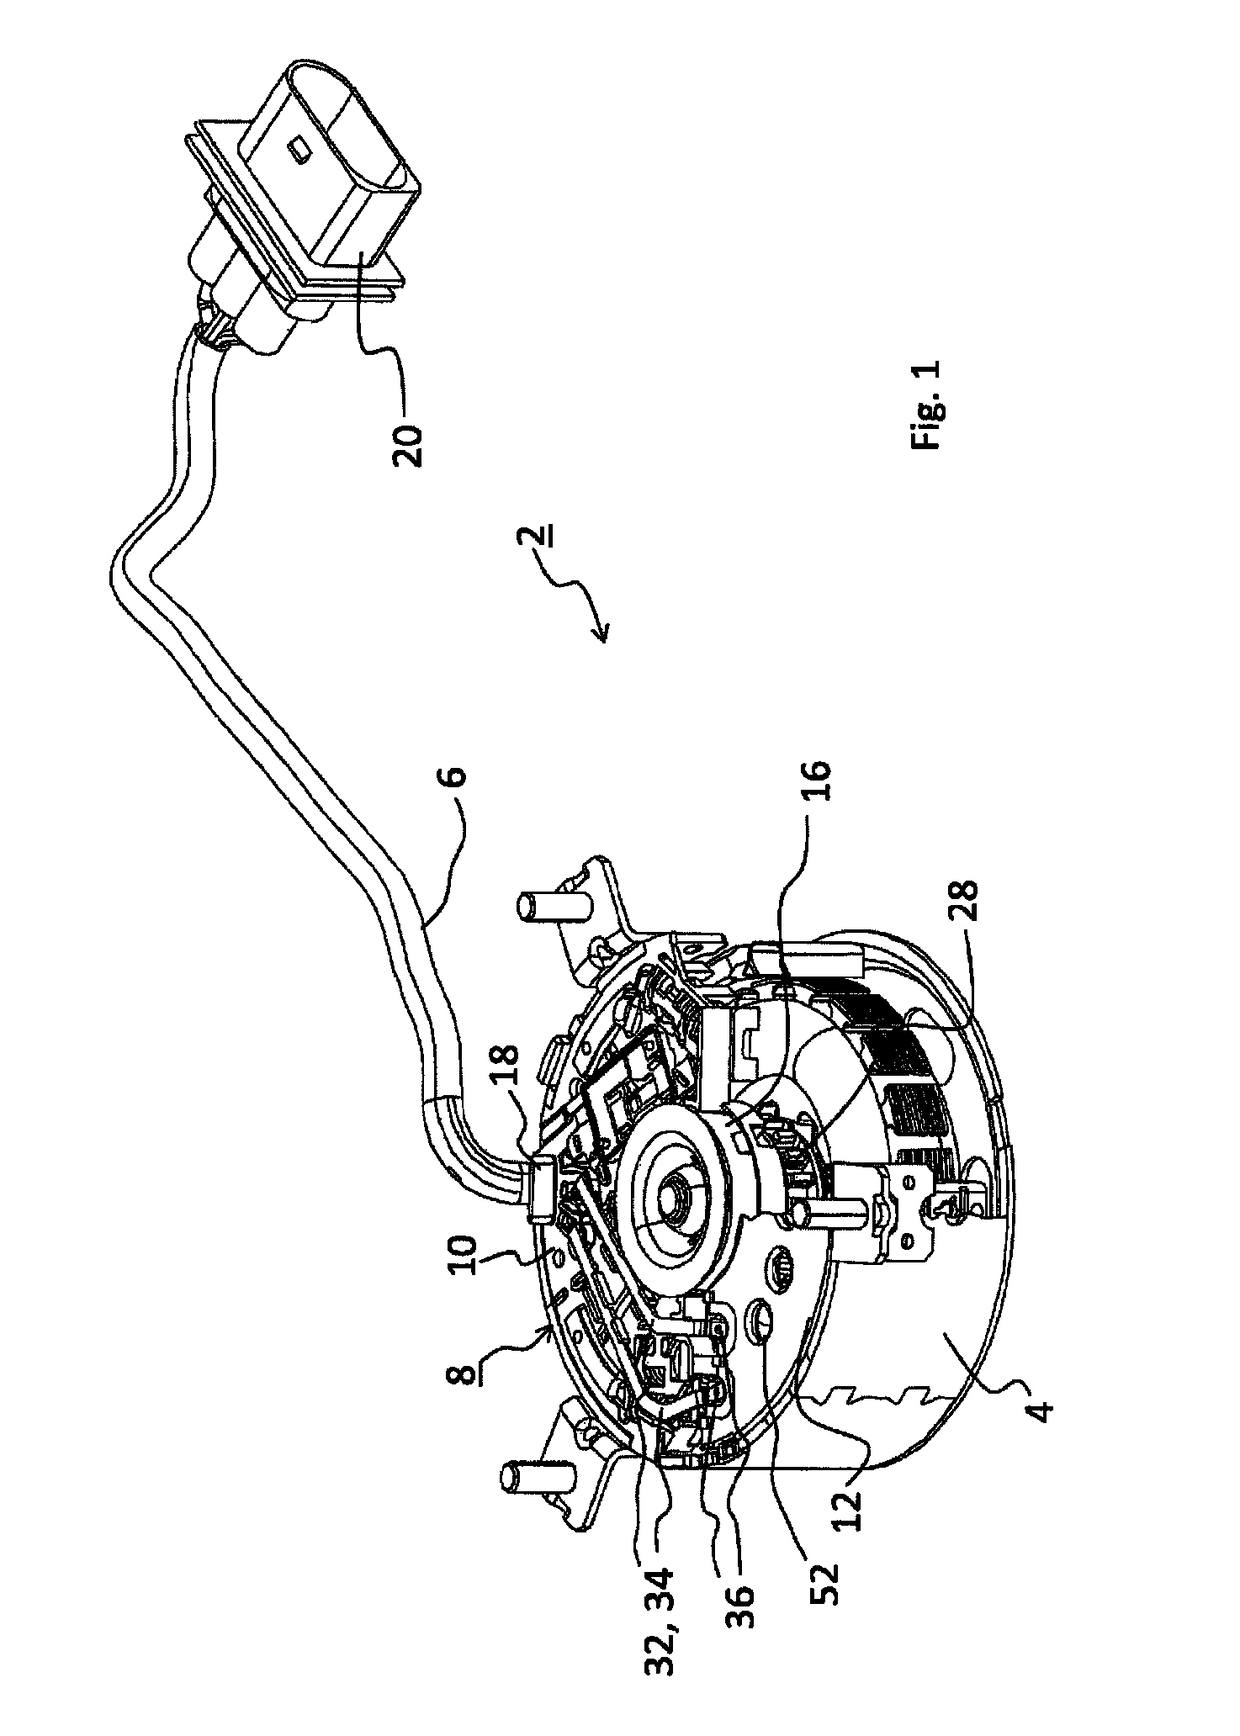 Brush system for an electric motor